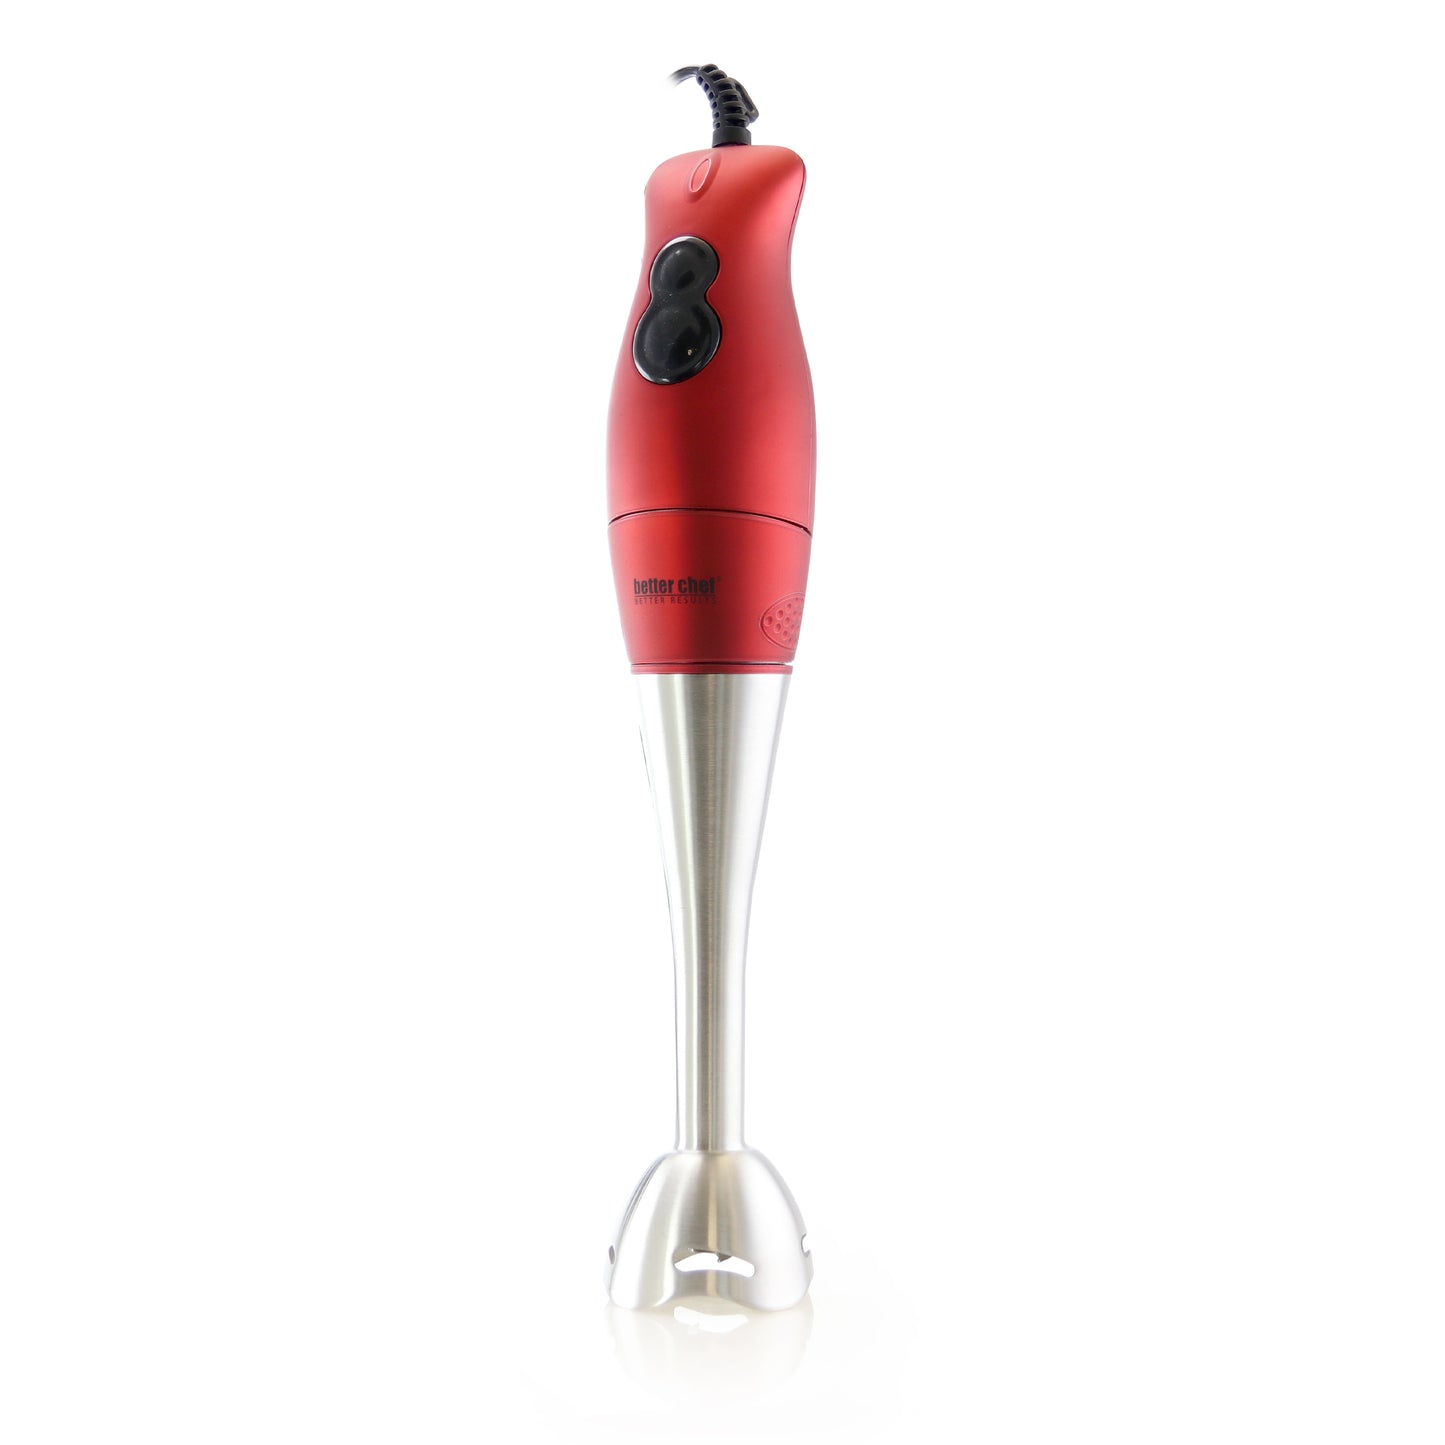 BETTER CHEF Better Chef DualPro Handheld Immersion Blender in Red